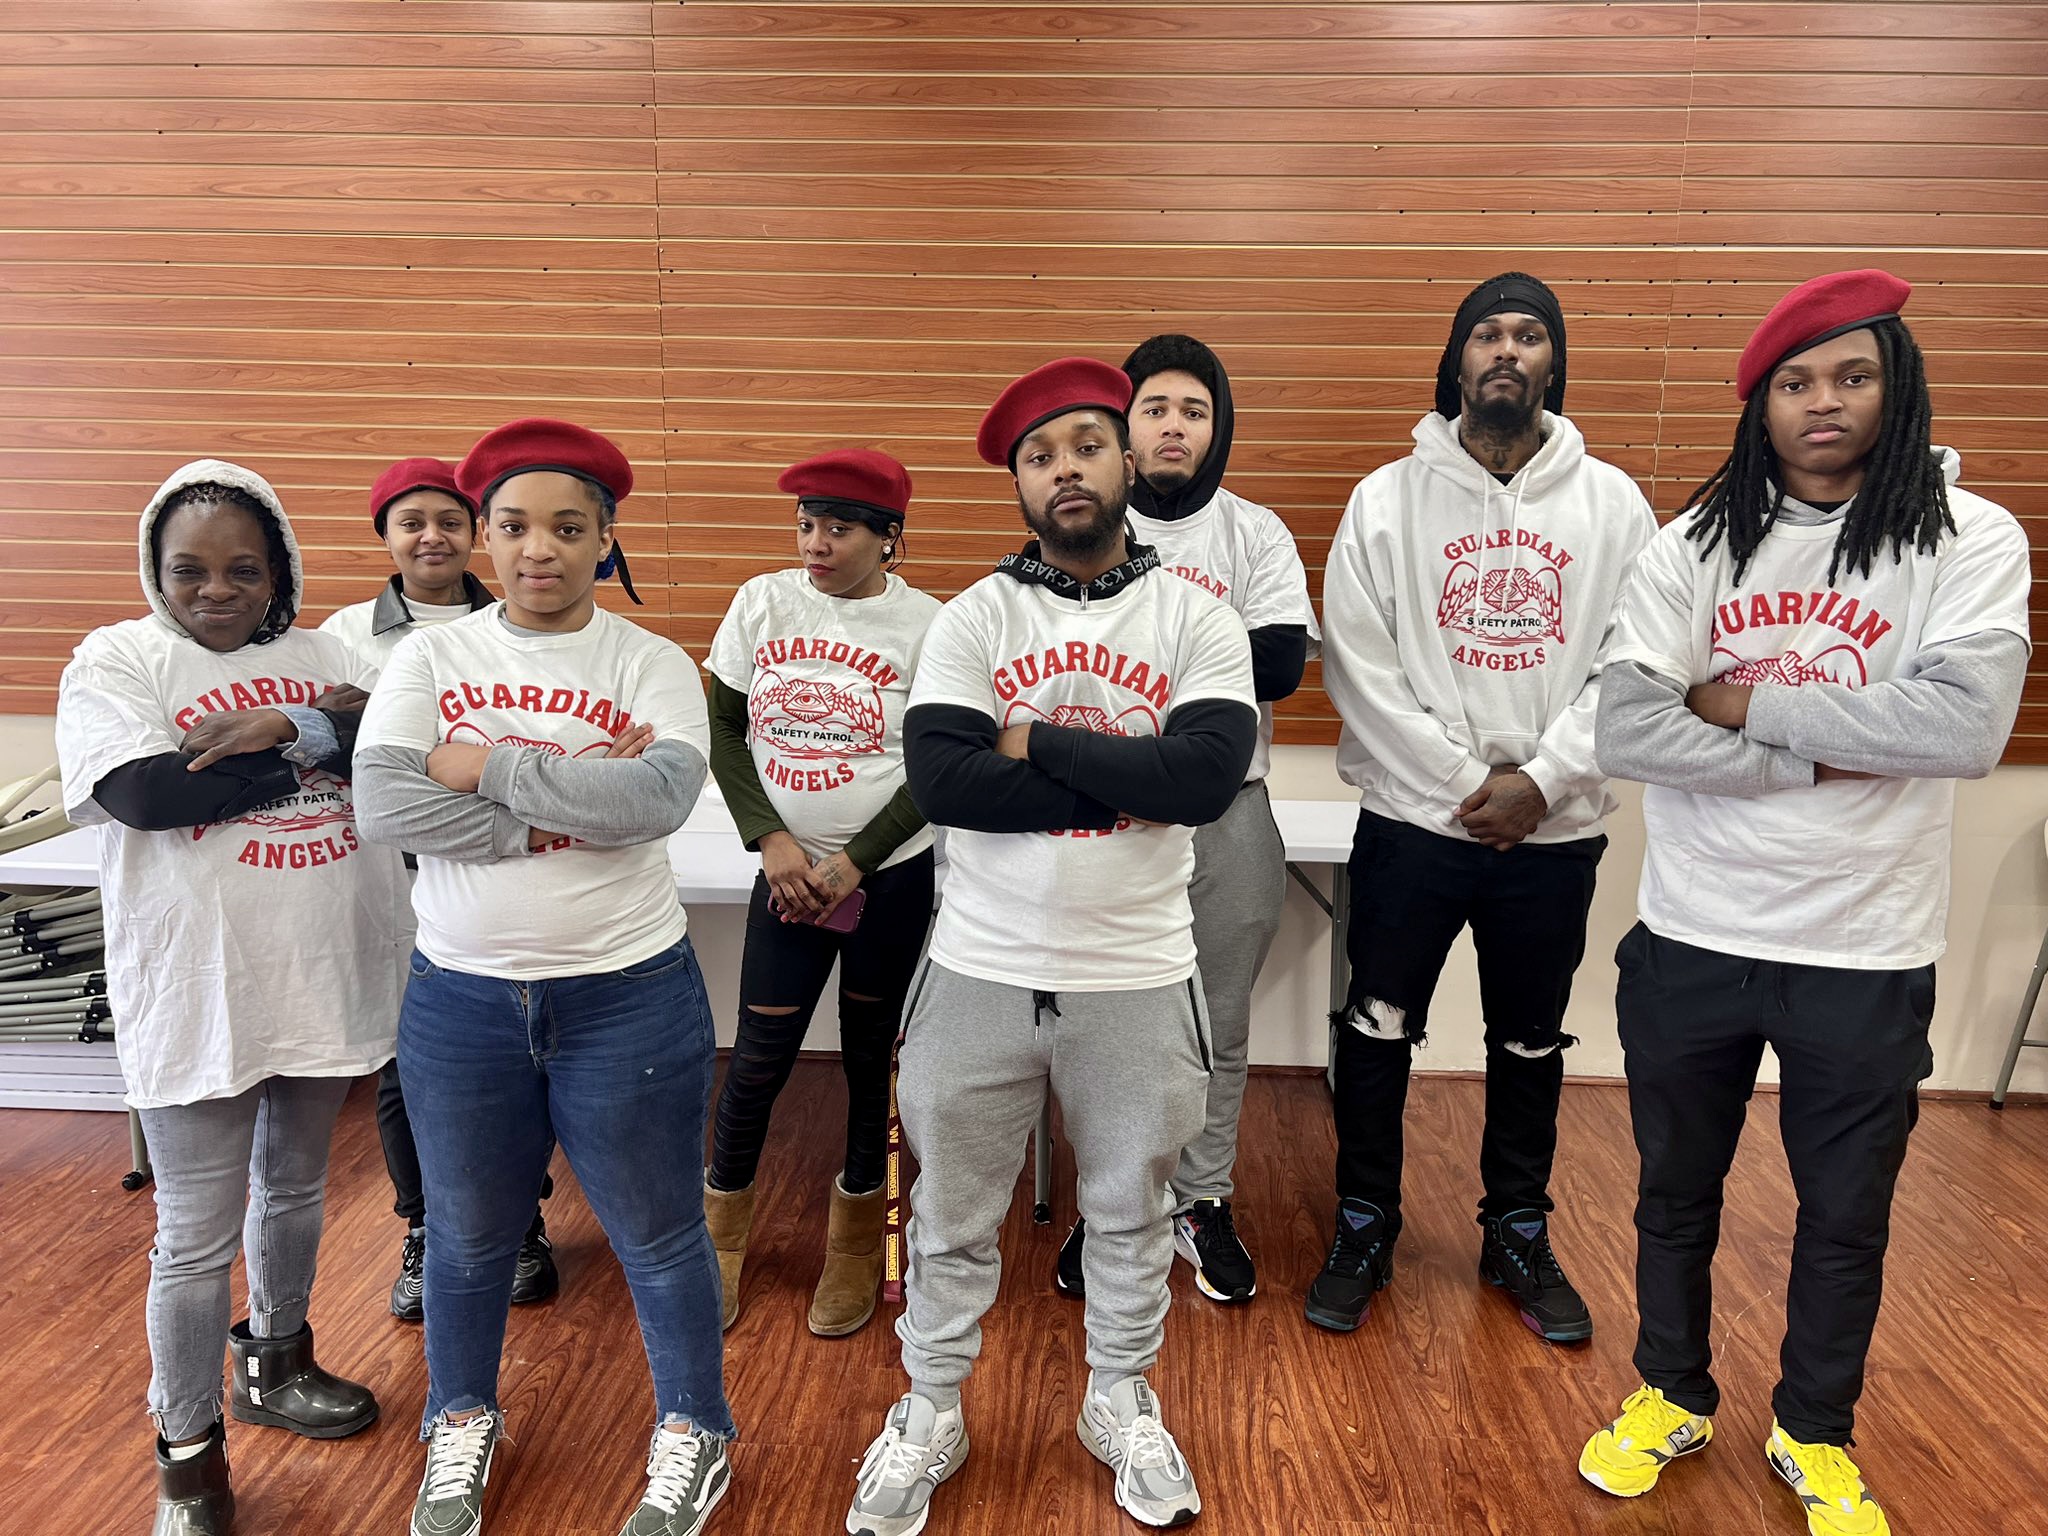 The DC Guardian Angels, a volunteer group dedicated to keeping public spaces in the city safe, have started patrolling the Green Line in an effort to serve as a crime deterrent. (John Ayala/DC Guardian Angels chief)